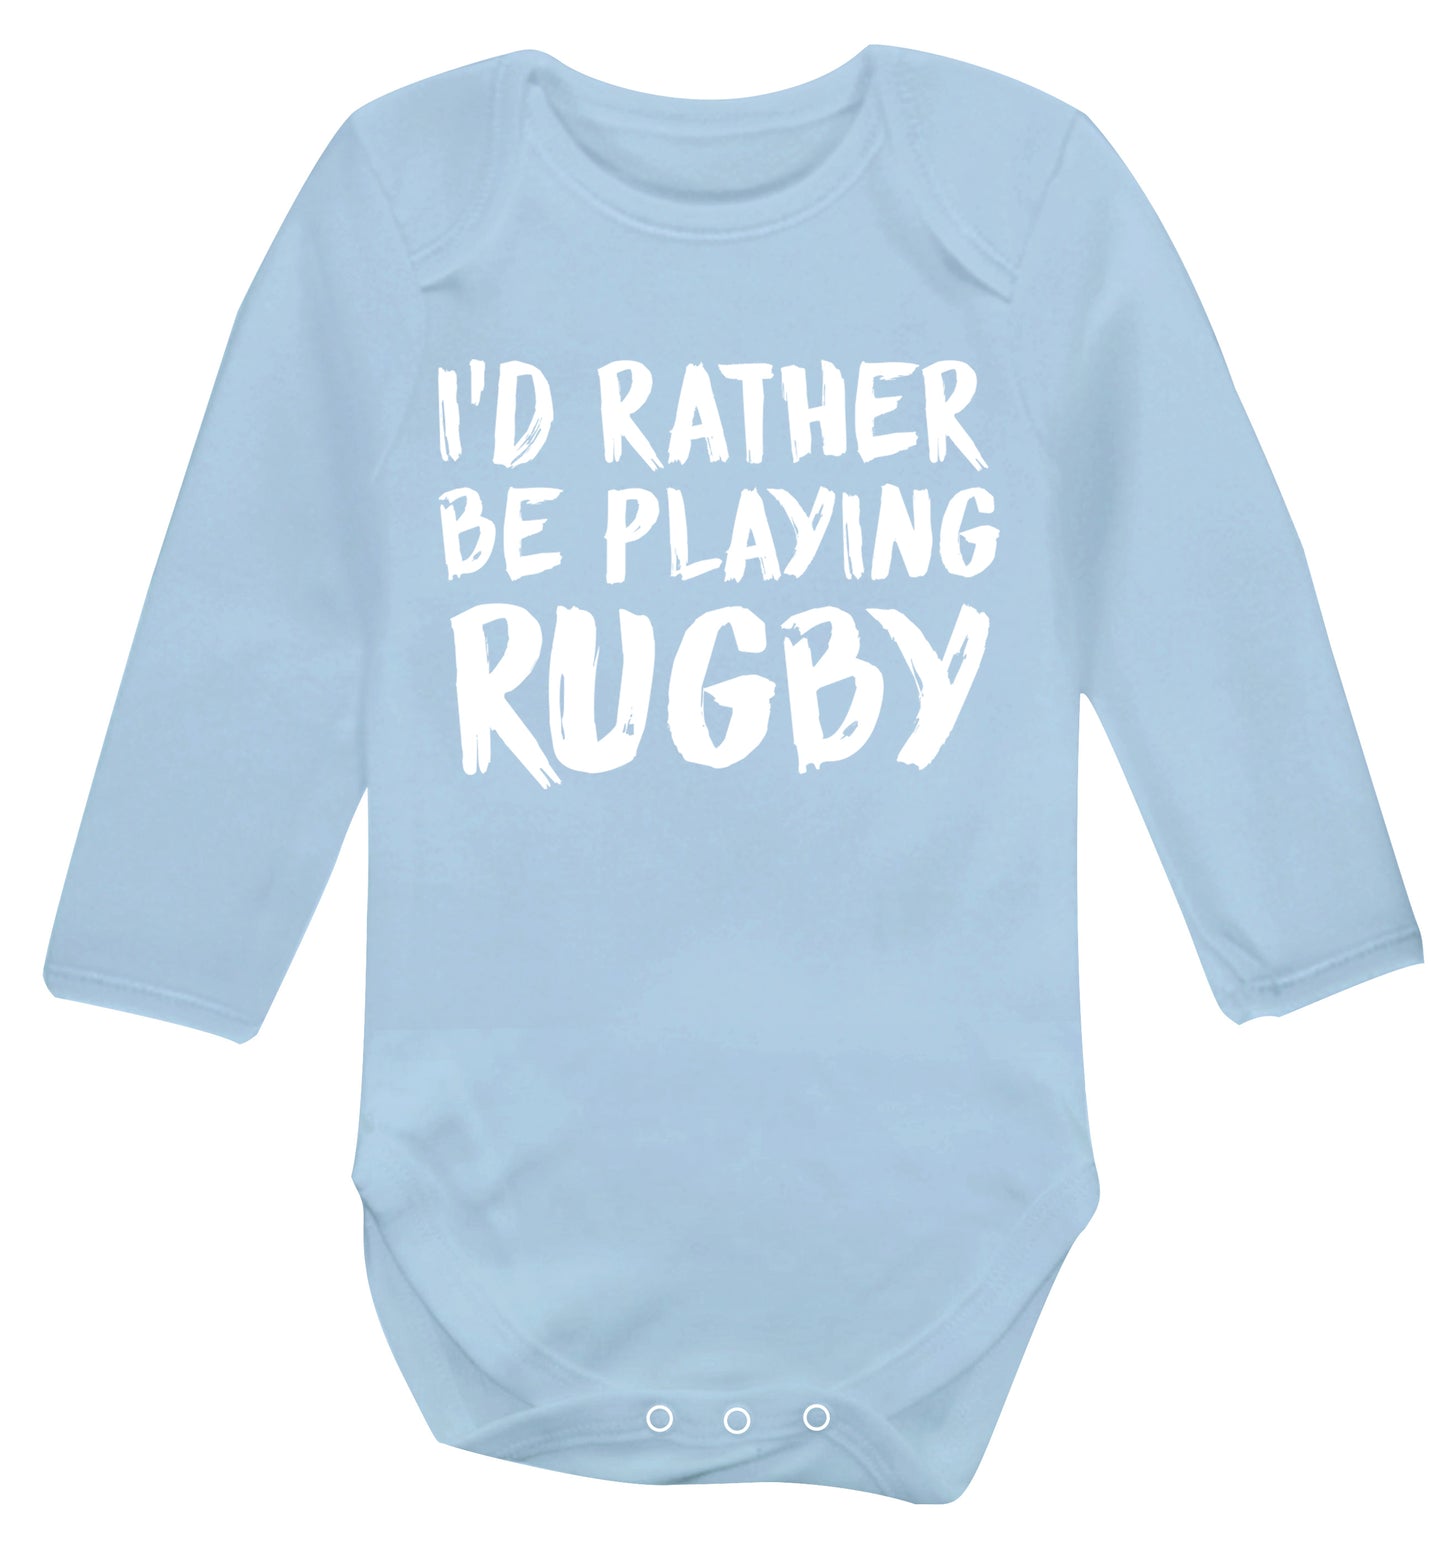 I'd rather be playing rugby Baby Vest long sleeved pale blue 6-12 months